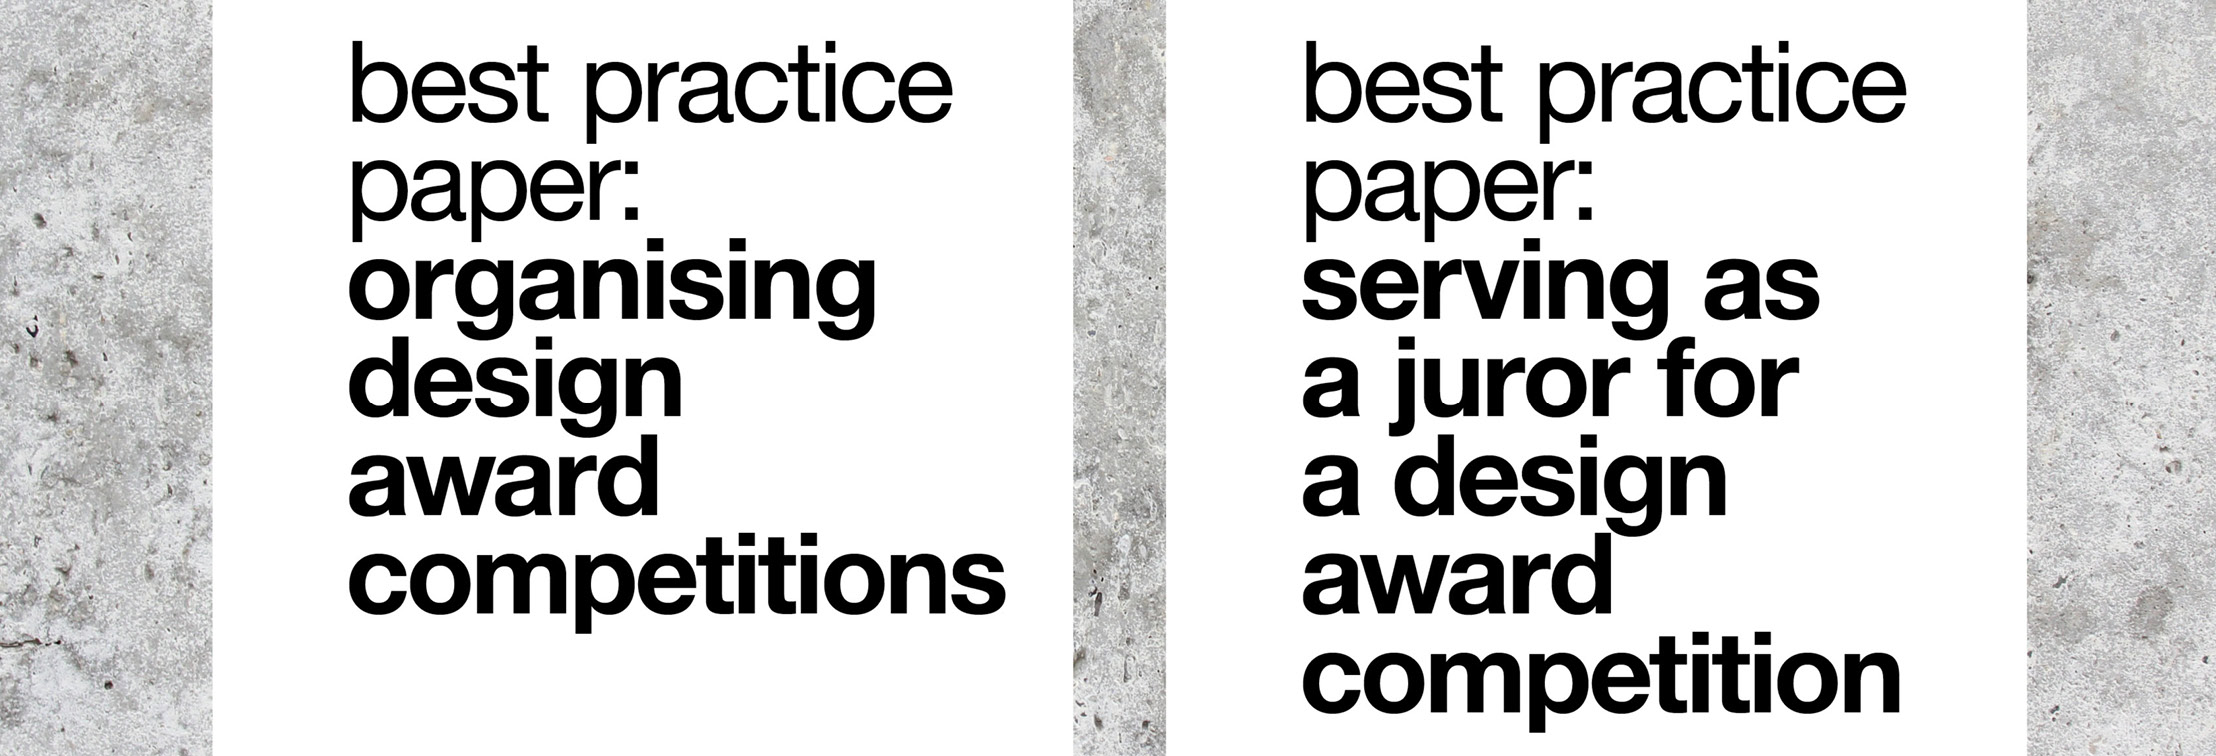 Two new Design Award Competitions Best Practice Papers Released